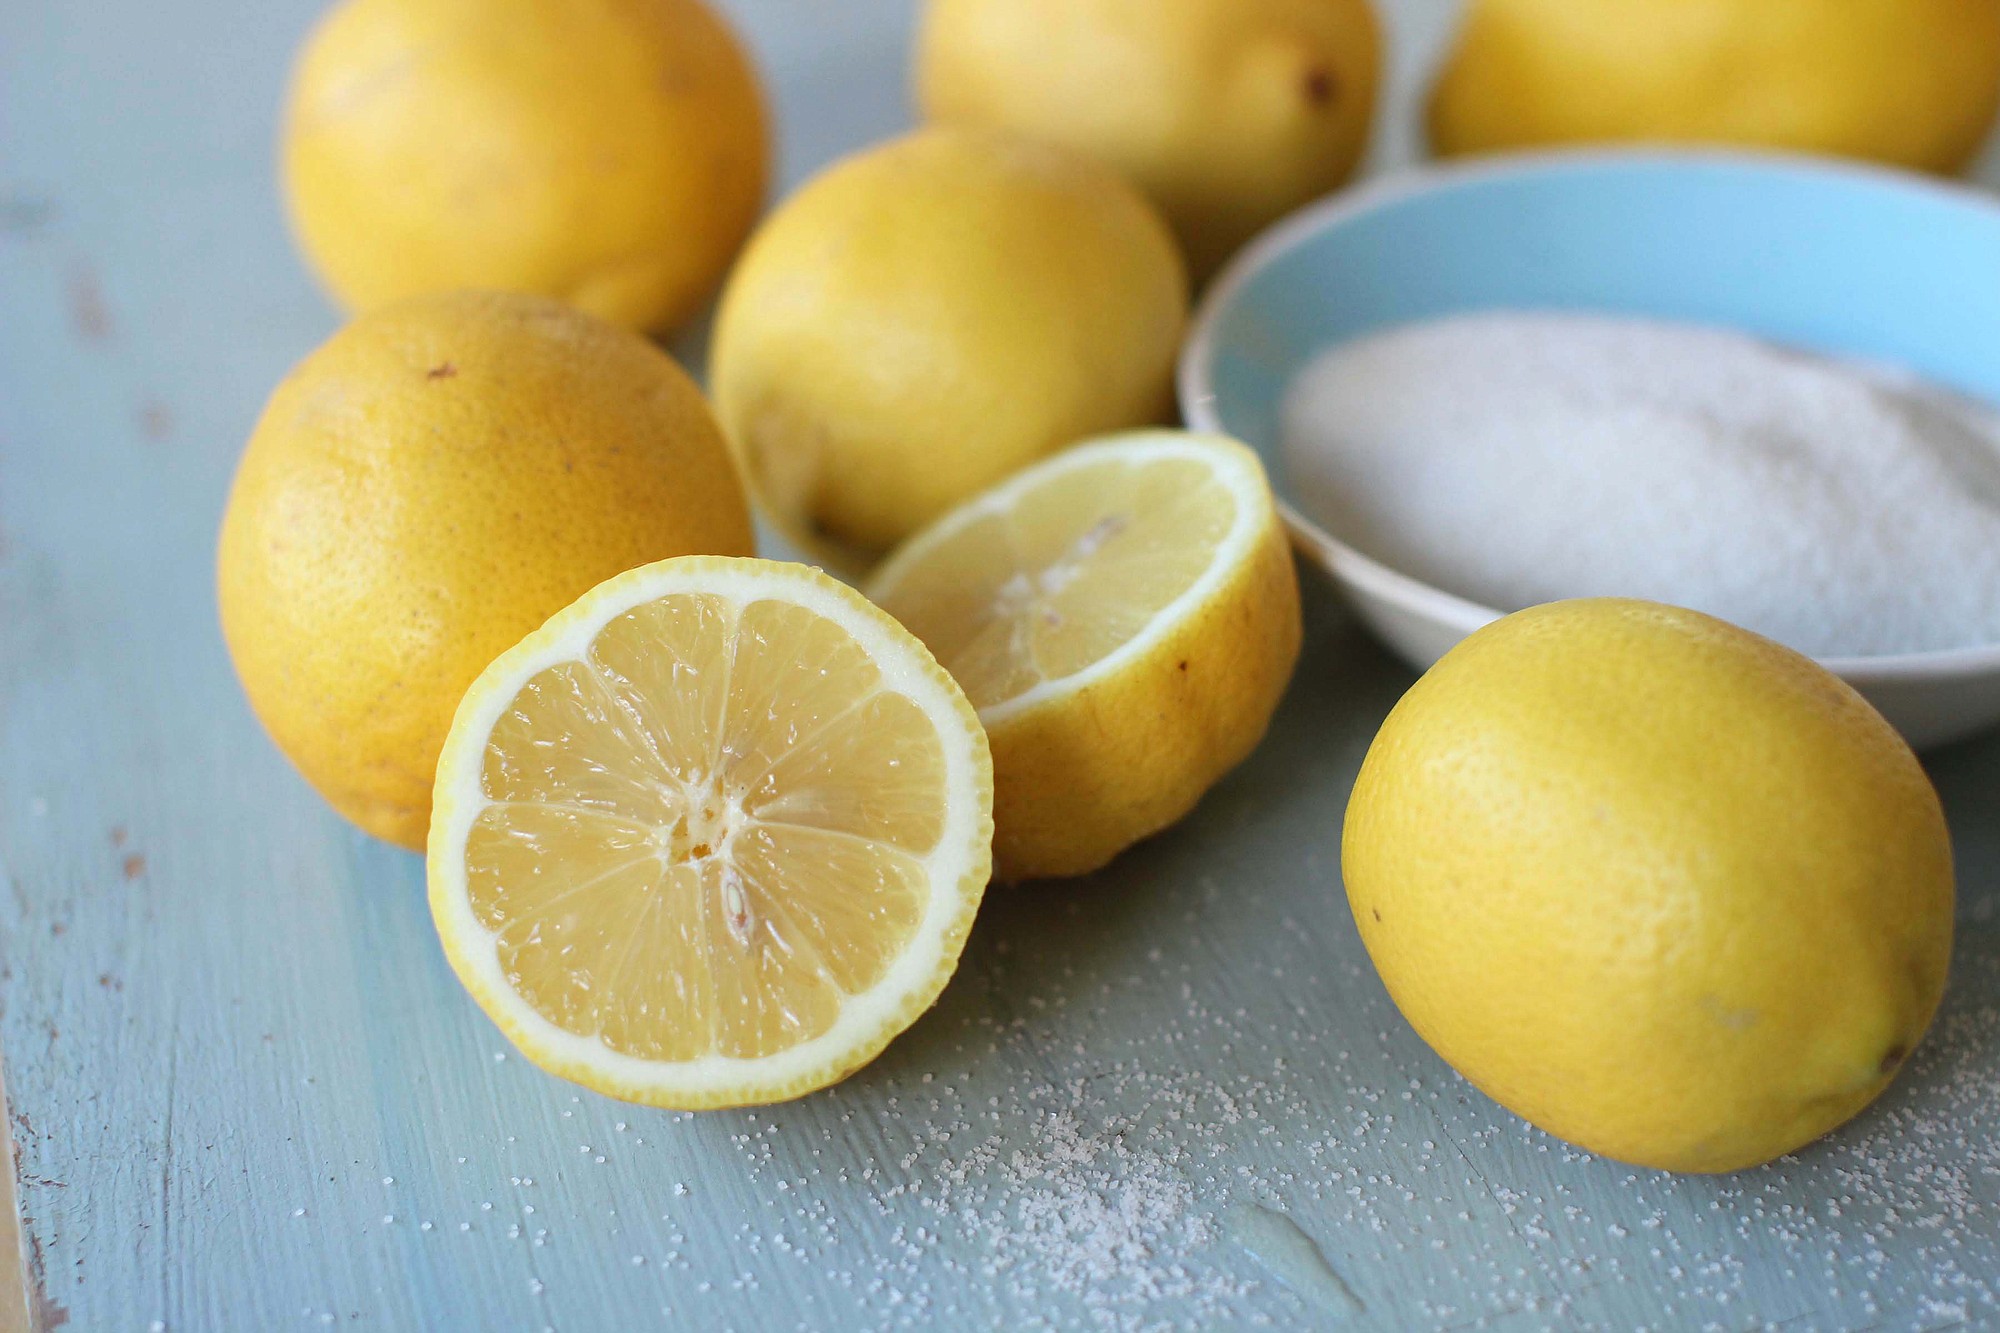 Lemons used for infused lemonade are shown April 27 in Concord, N.H.